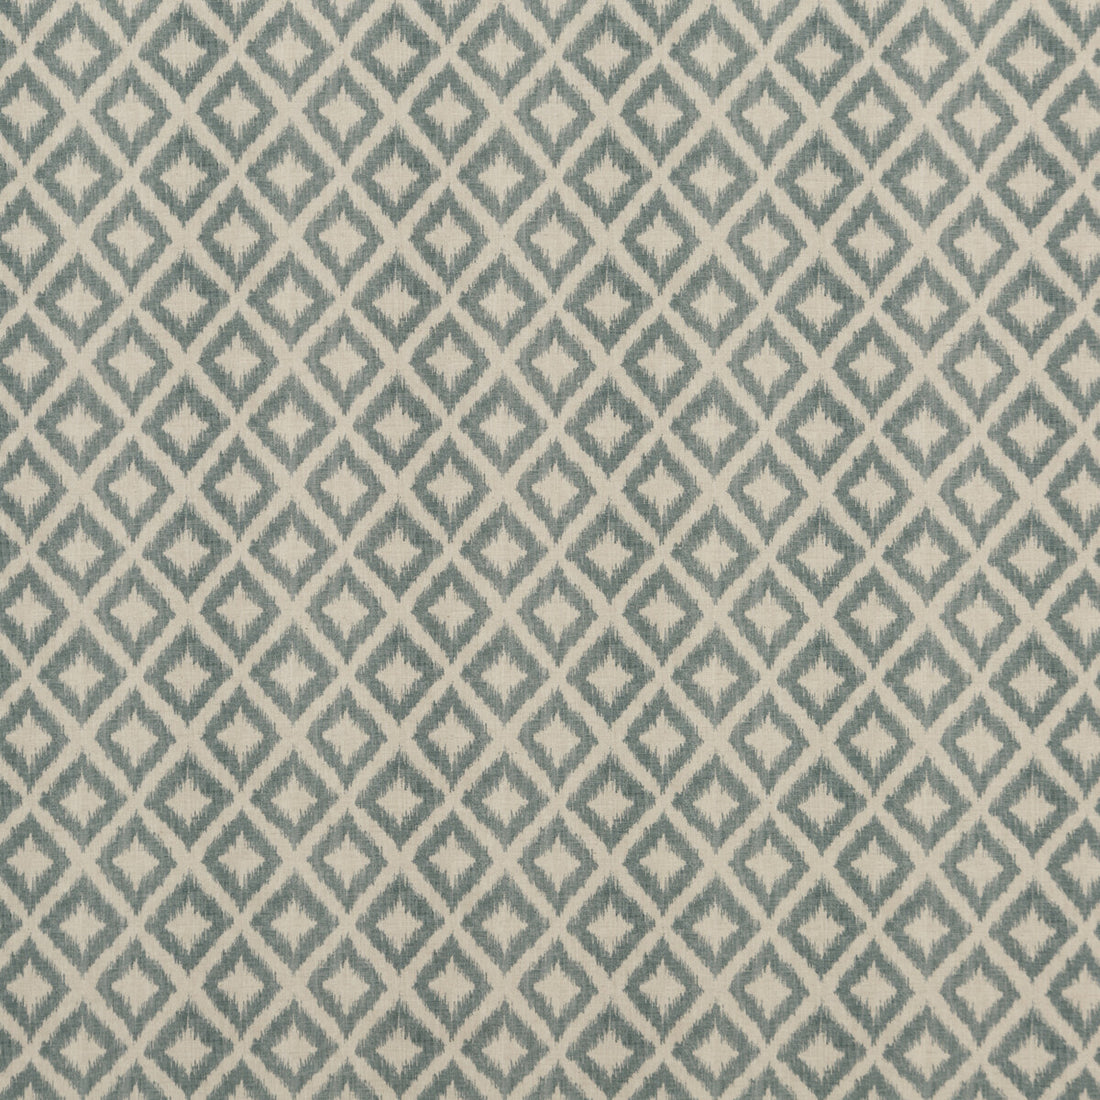 Salsa Diamond fabric in aqua color - pattern PP50431.3.0 - by Baker Lifestyle in the Carnival collection